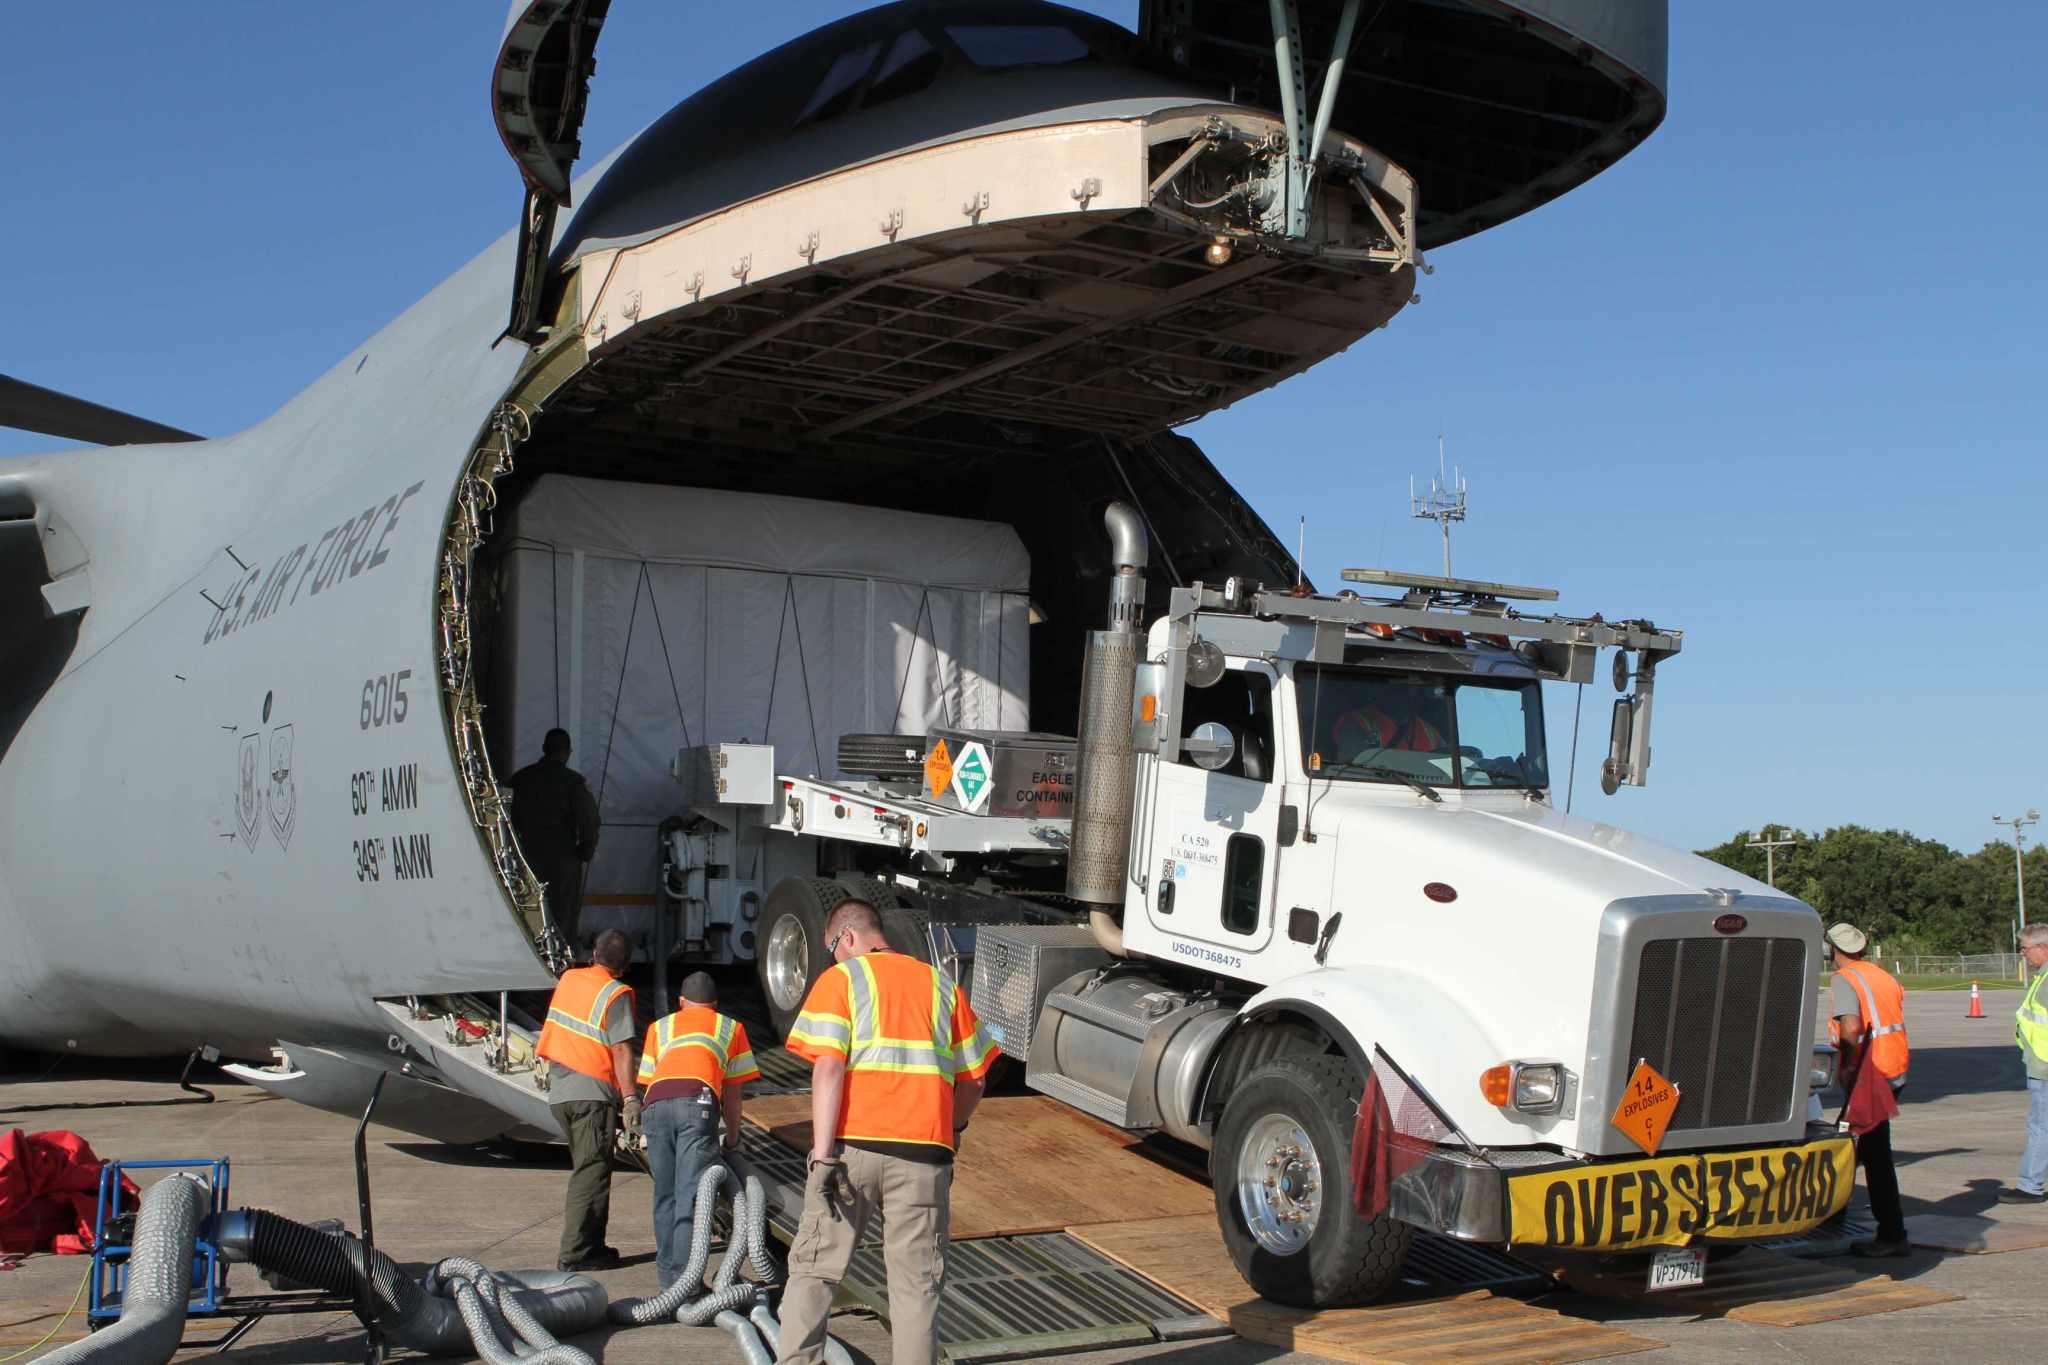 Truck backs into airplane to get box